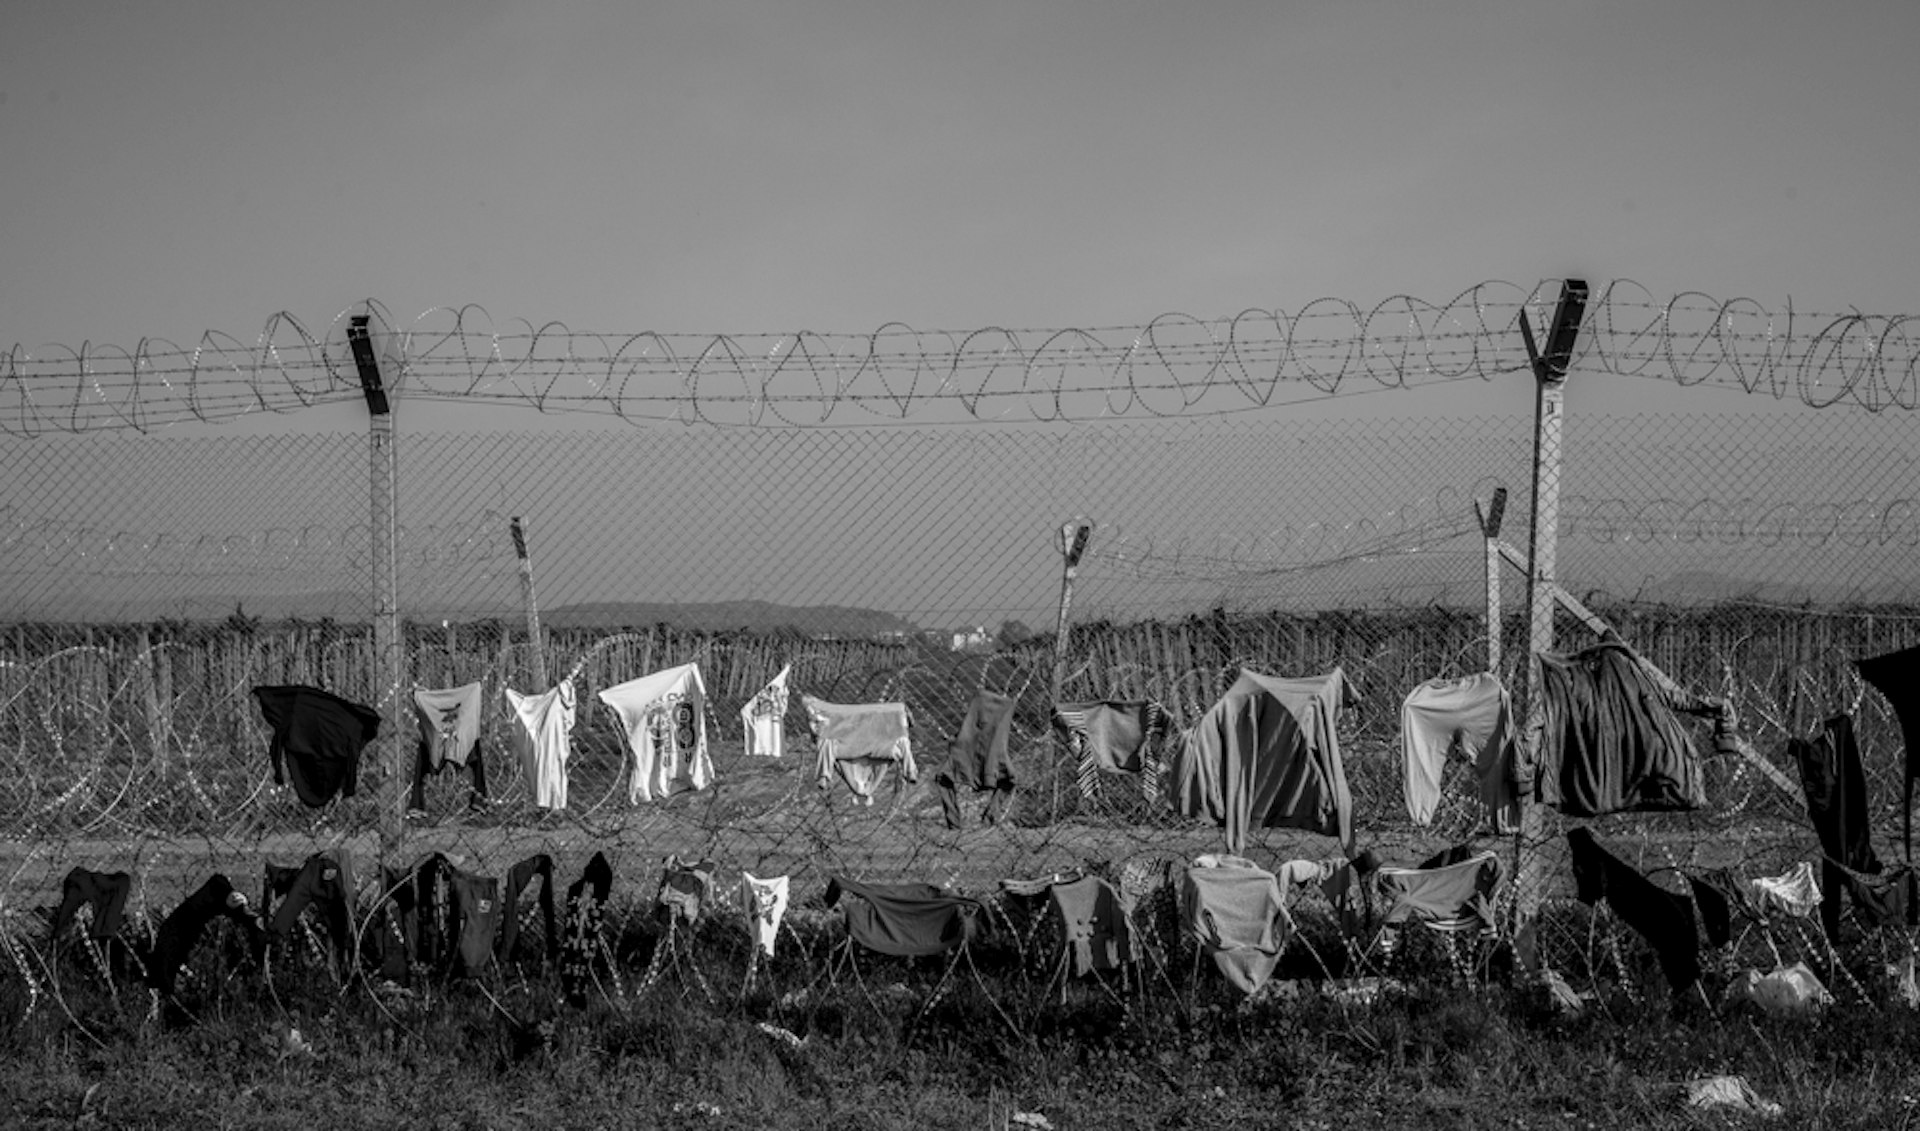 The border fence between Greece and Macedonia from the Greek side in the small village of Idomeni. Migrants who have gathered here hoping to be able to pass through and on to Germany are using the fence to hang out washing. 